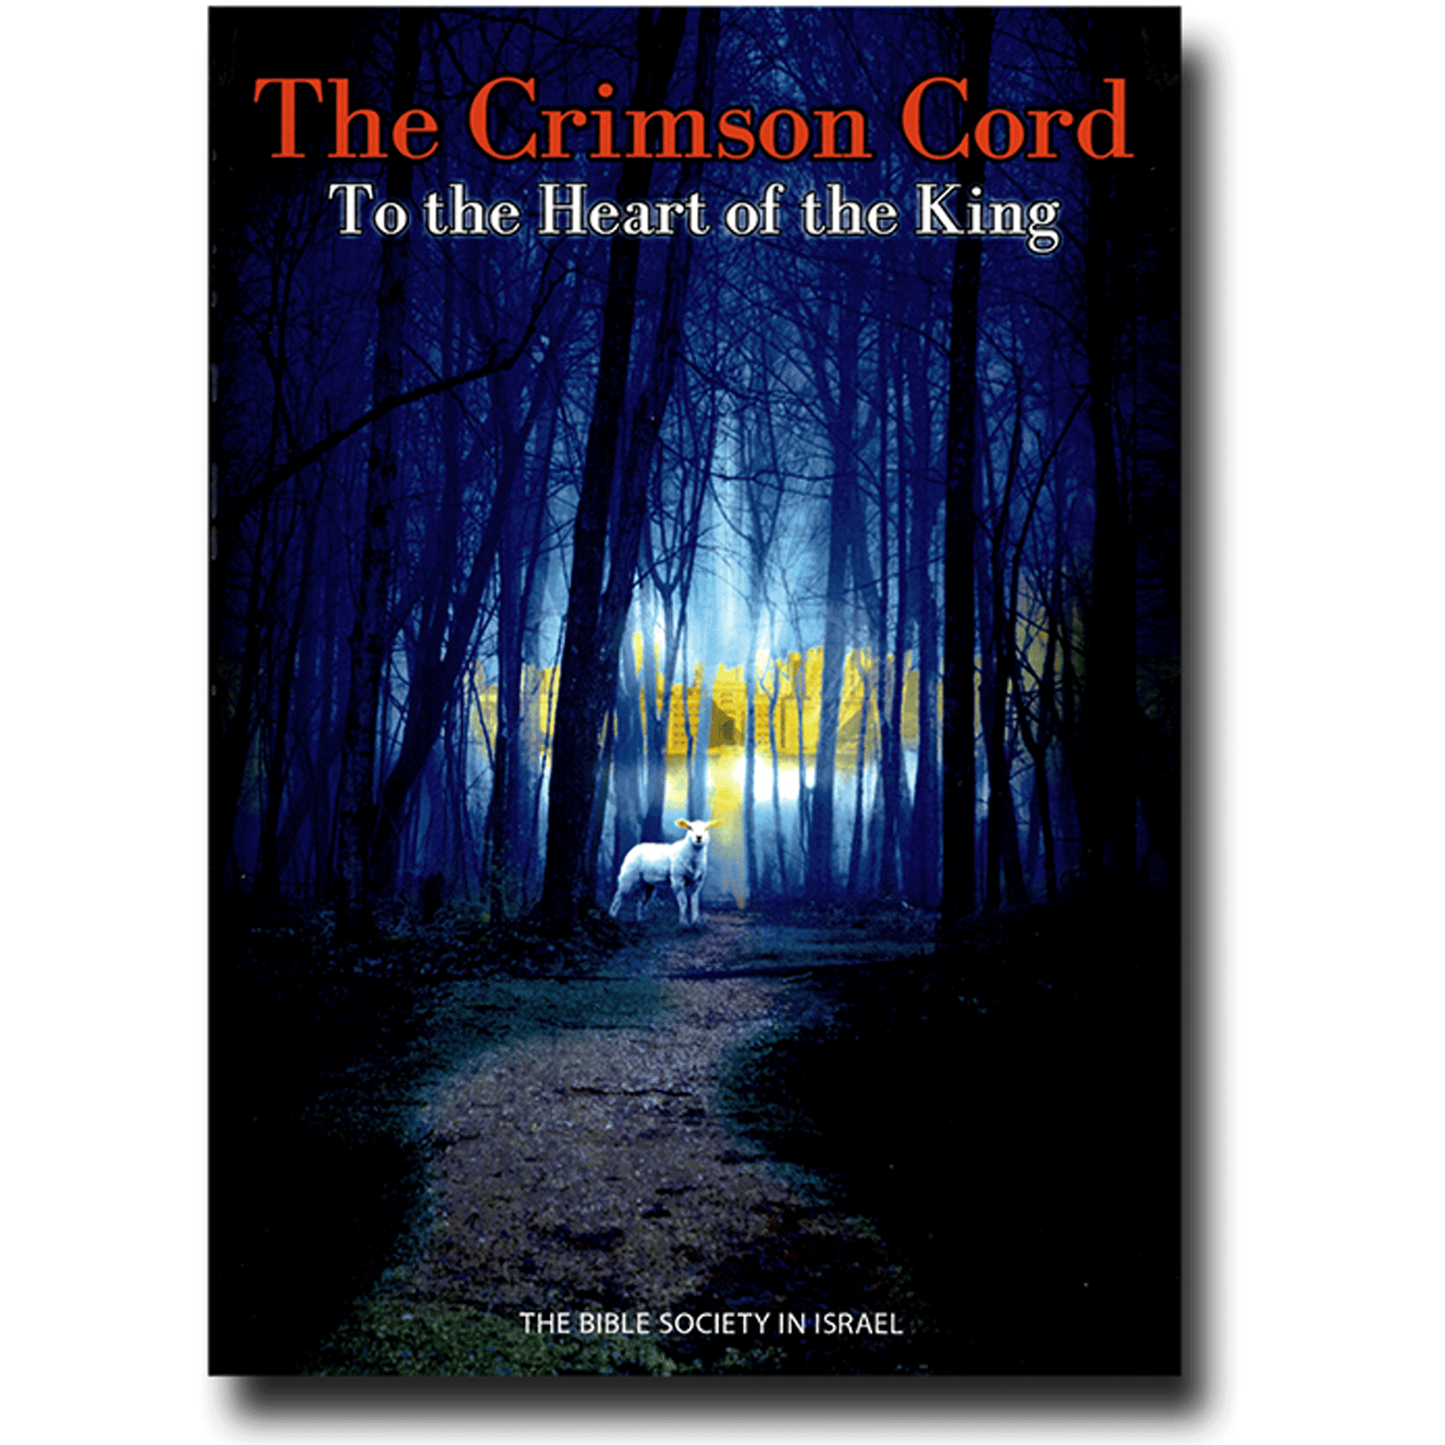 The Crimson Cord To the Heart of the King